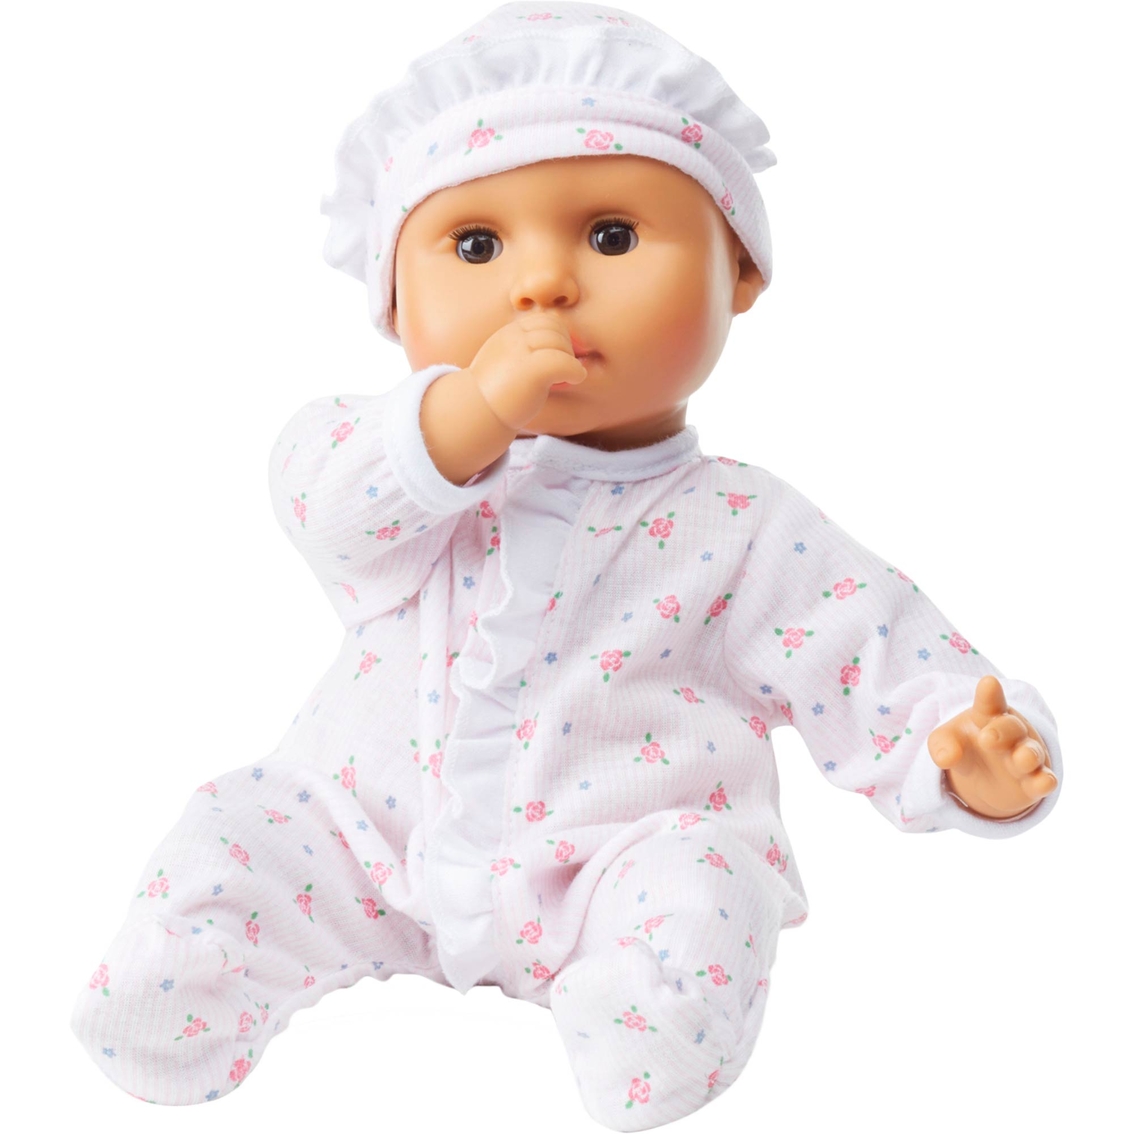 Melissa and Doug Mine to Love Marianna 12 in. Doll - Image 3 of 5